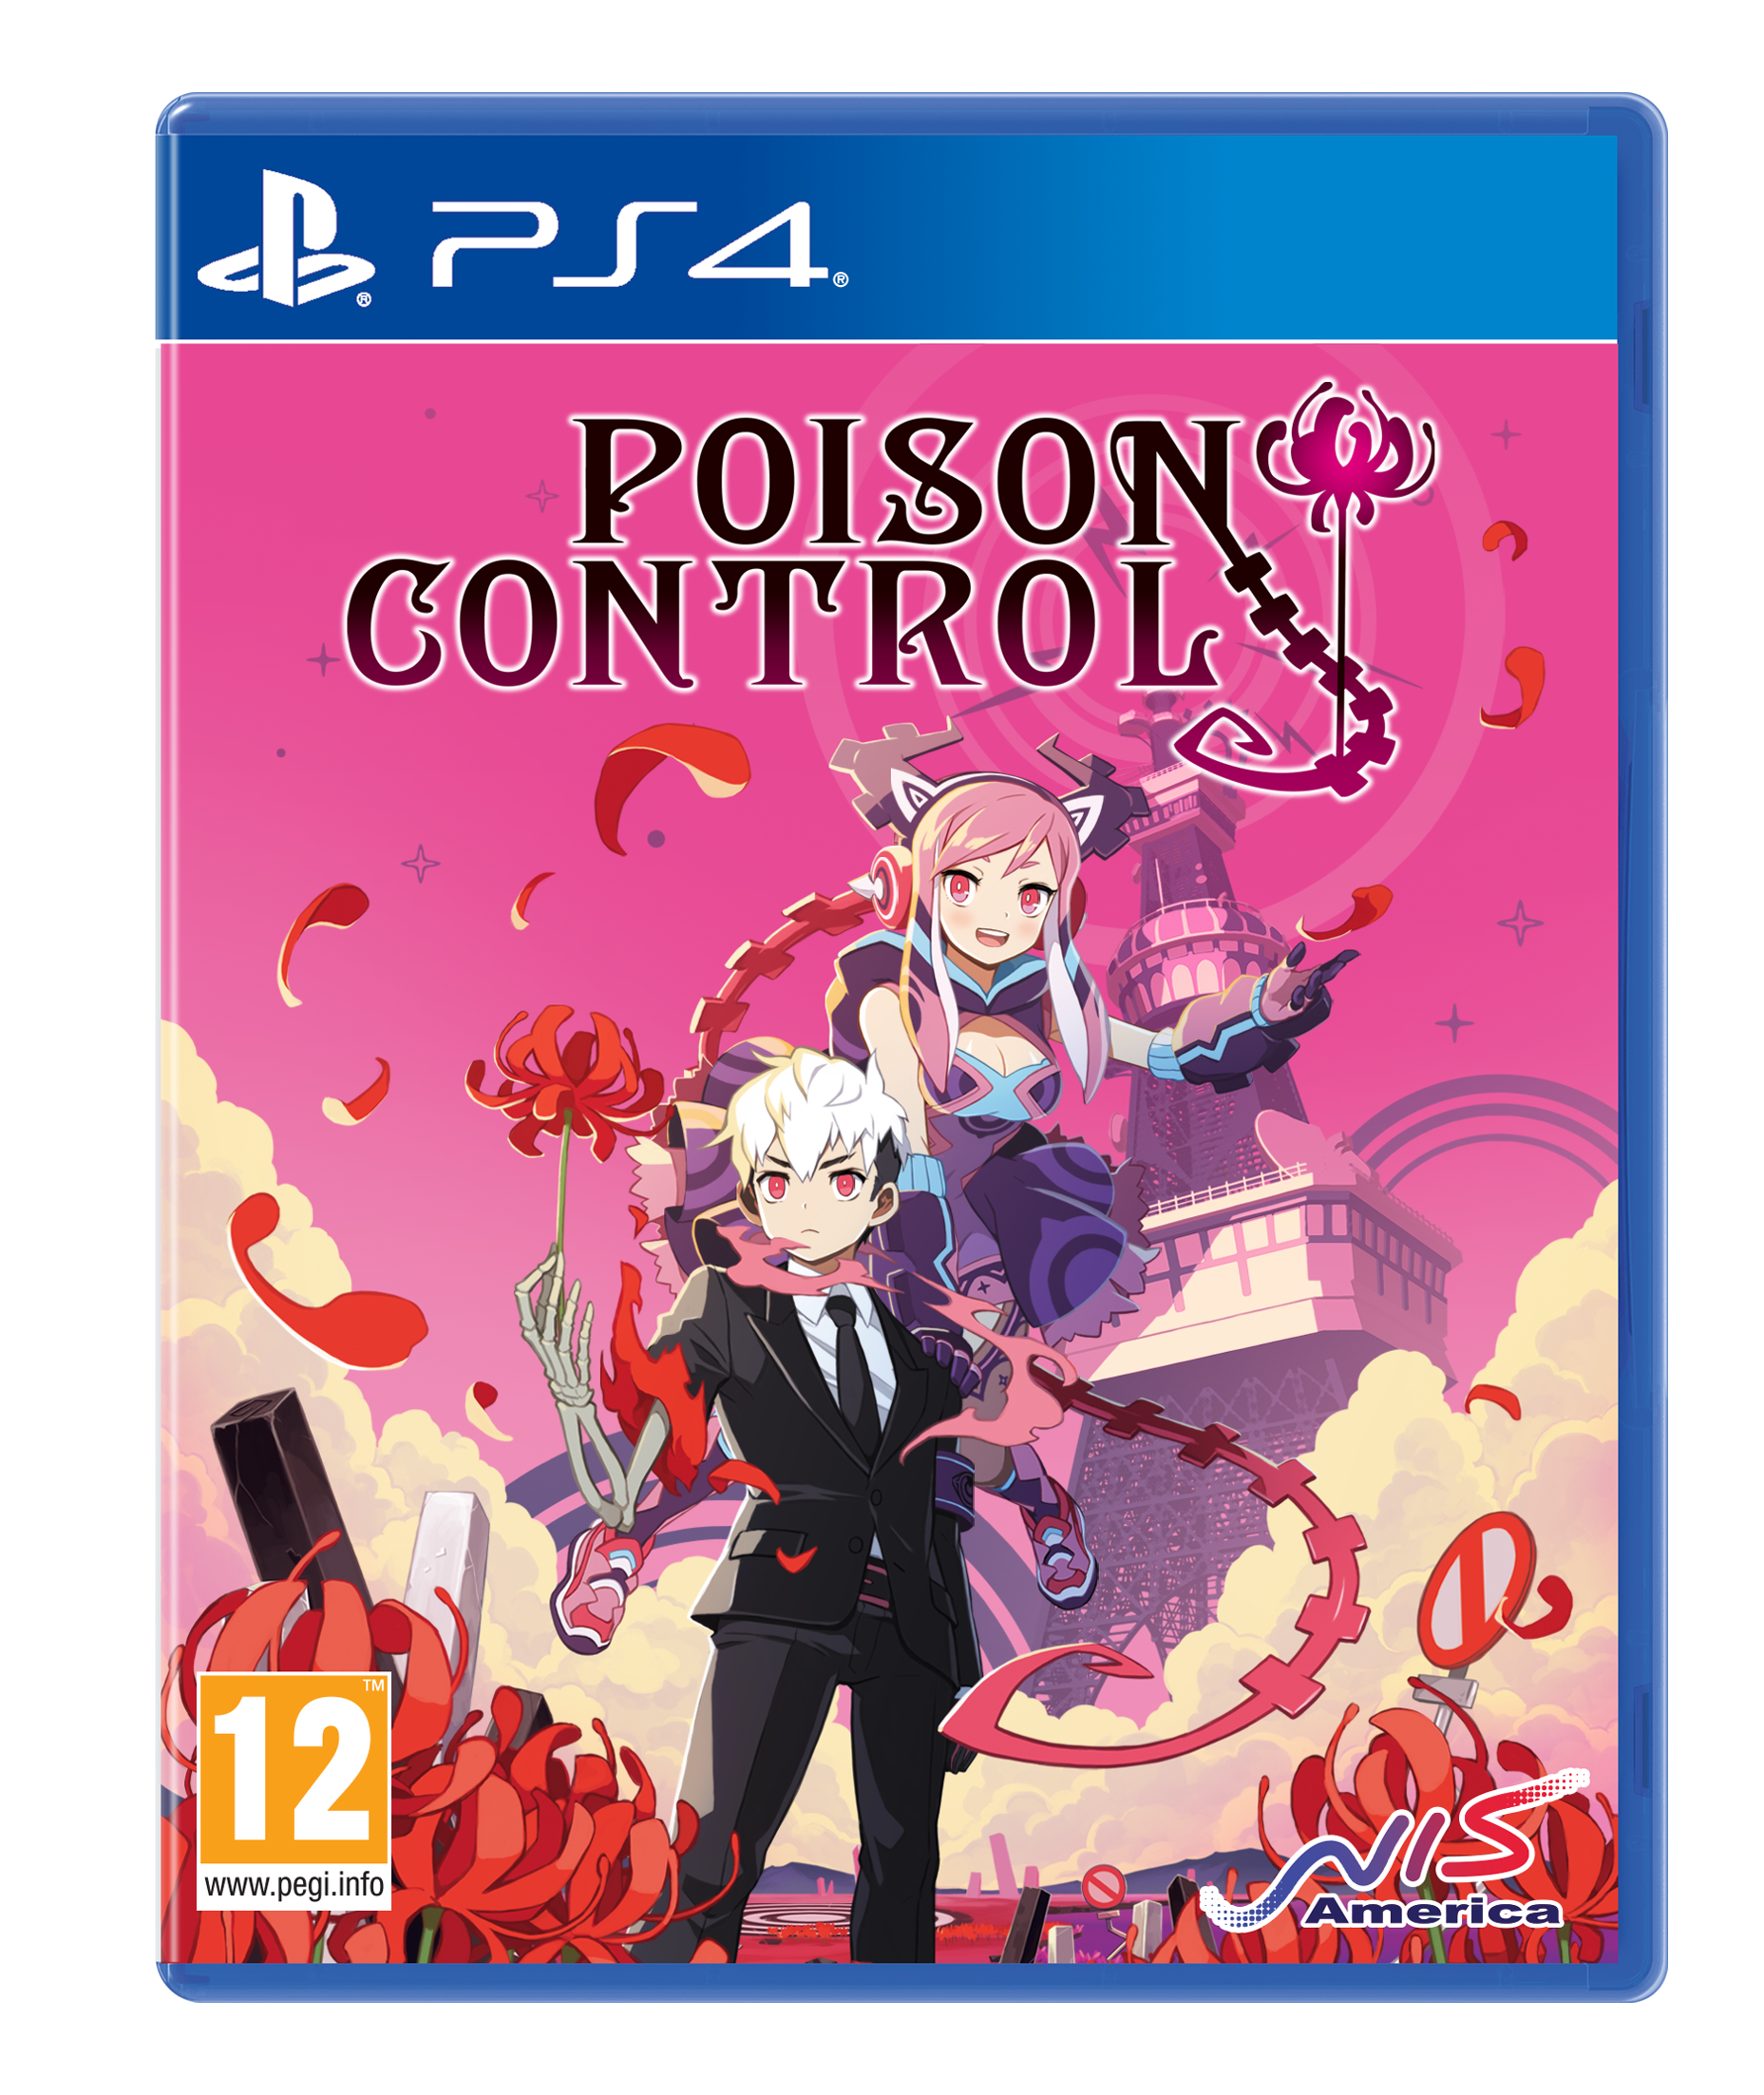 Poison Control - Standard Edition - PS4®